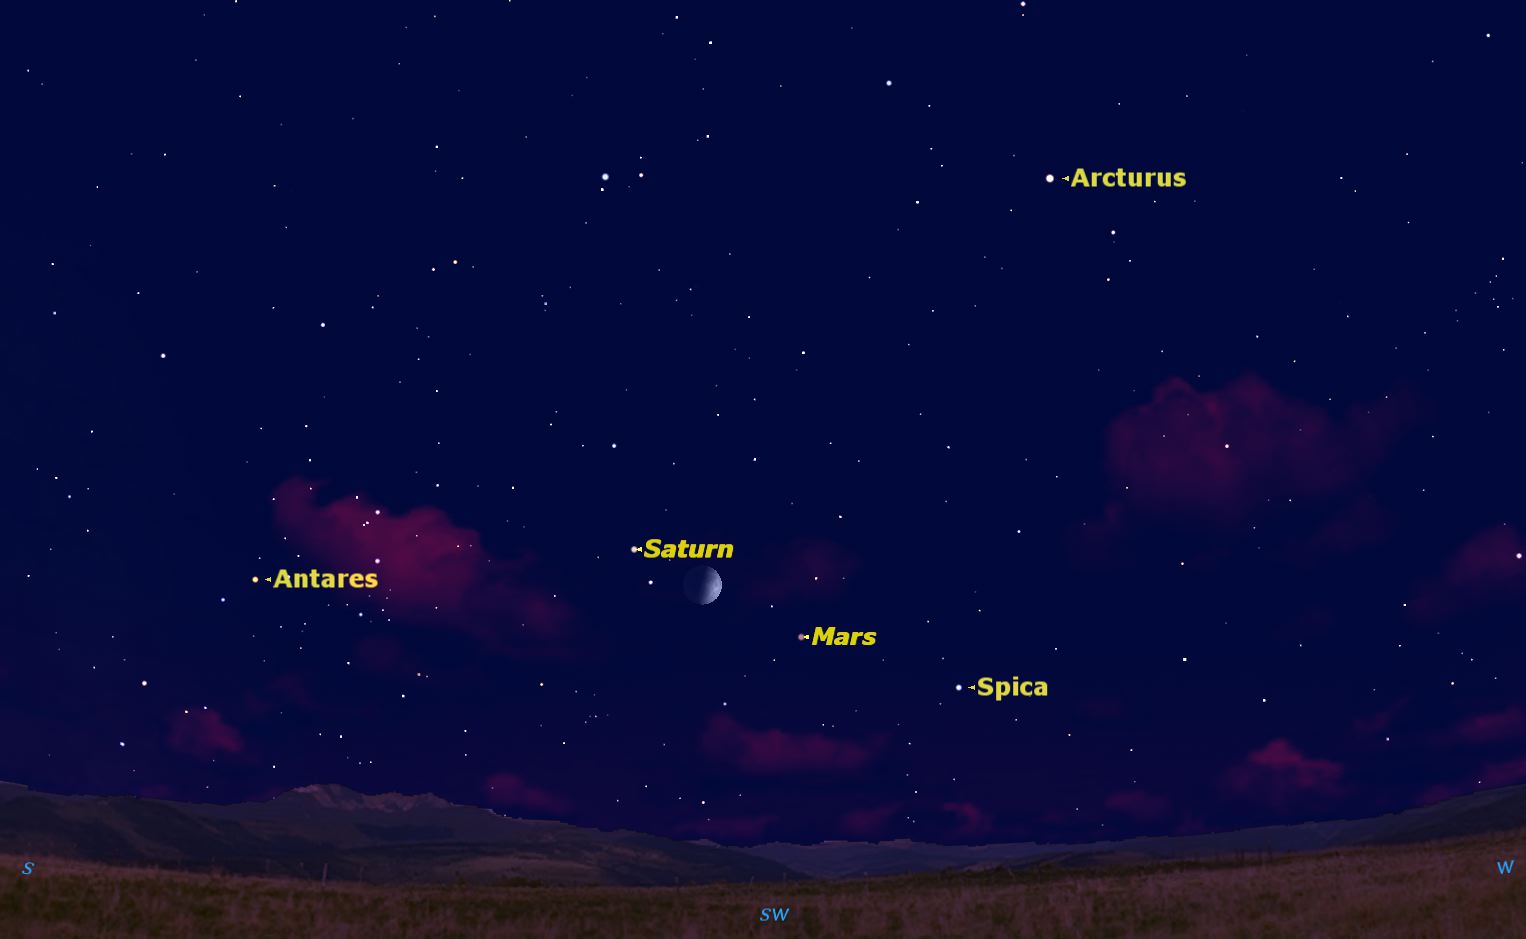 On August 3, the Moon lies between Mars and Saturn. Credit: Starry Night software.